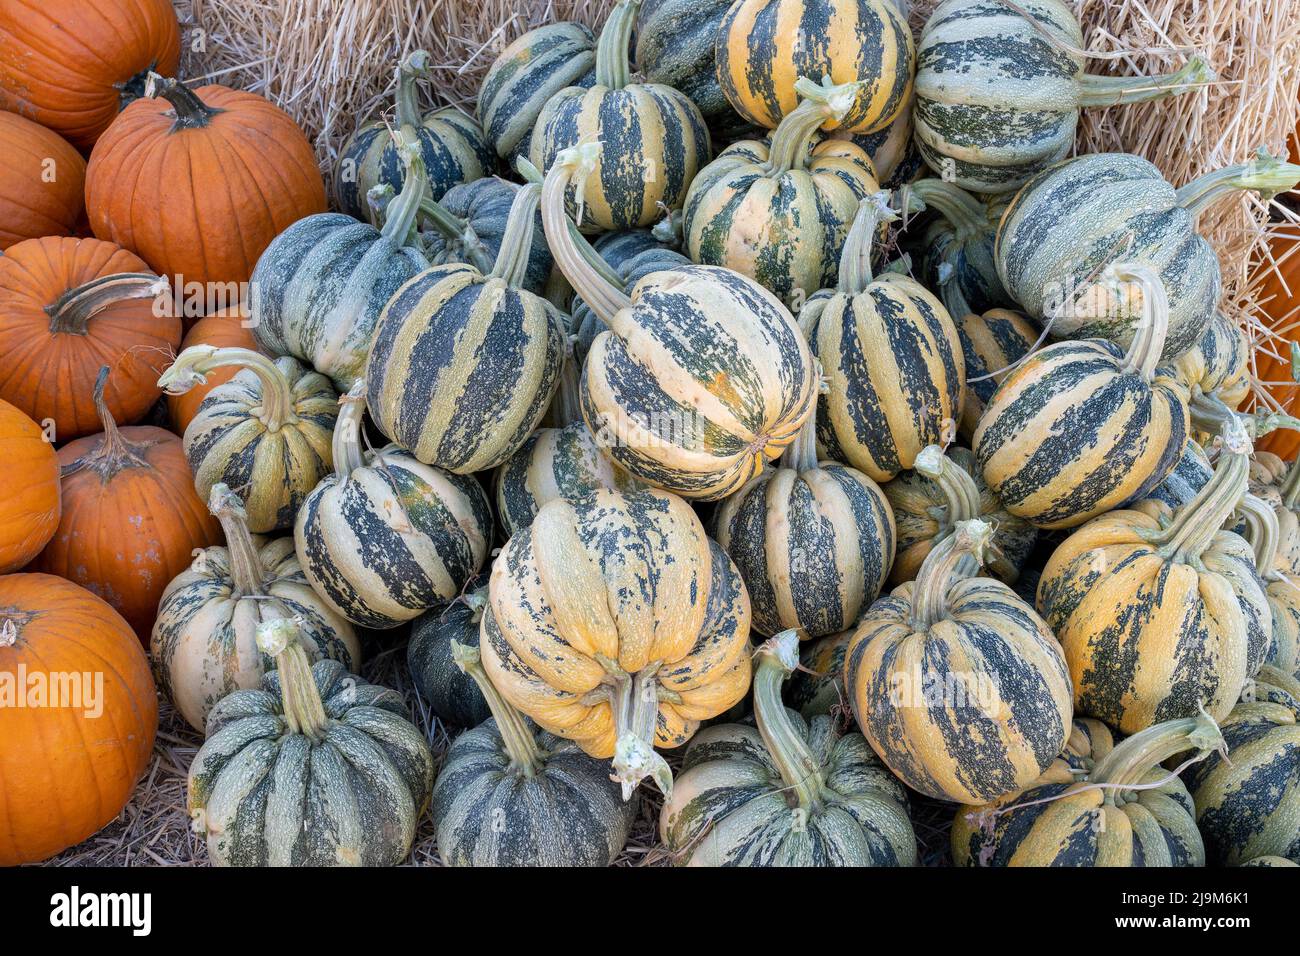 Still life displaying halloween composition with pumpkins, Carnival squash against hay pile Stock Photo